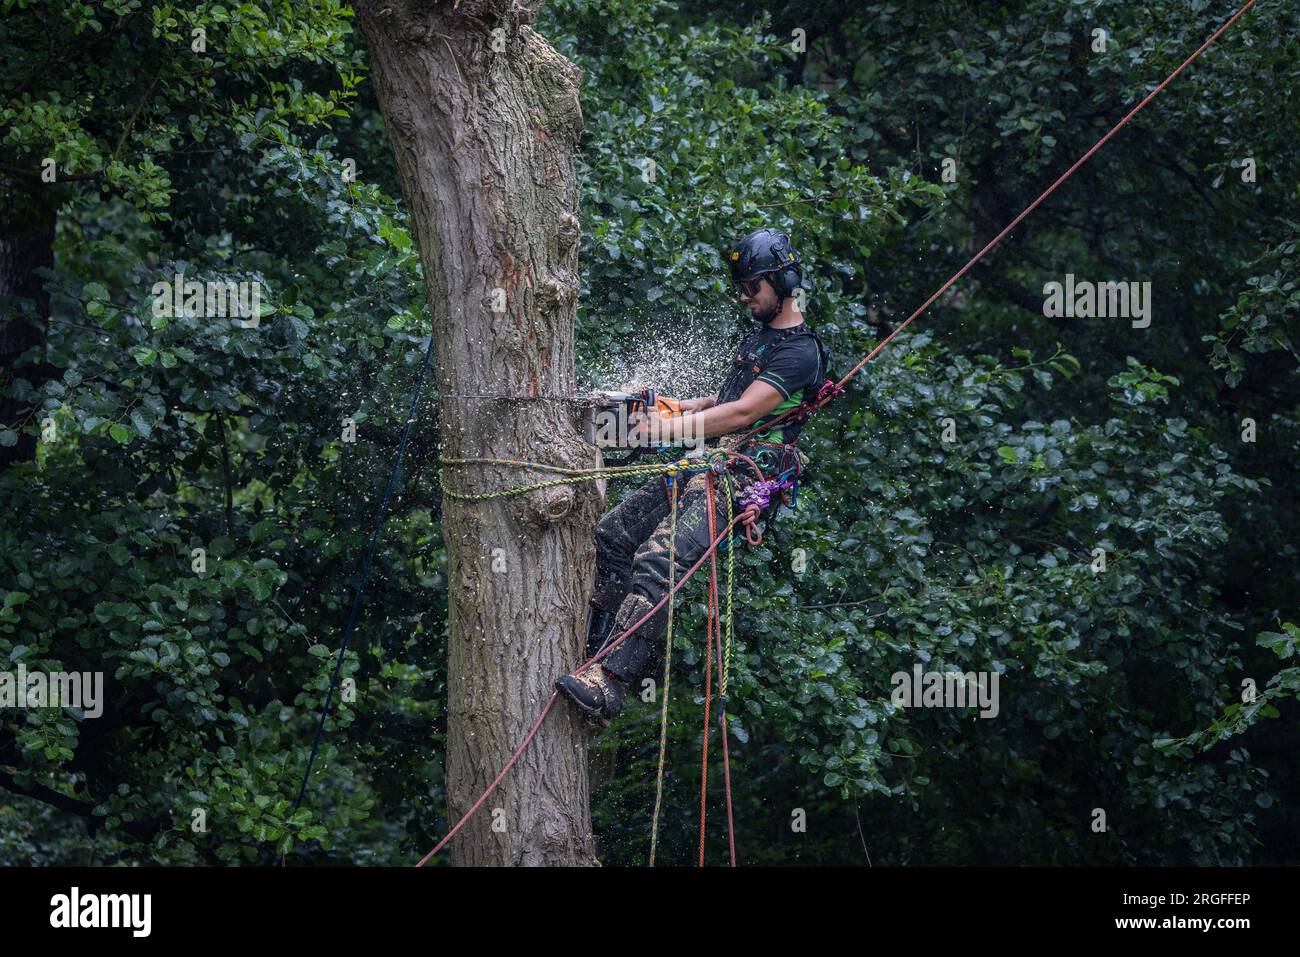 Arborist tree surgeon, using safety ropes and guide lines, felling tree in UK Stock Photo